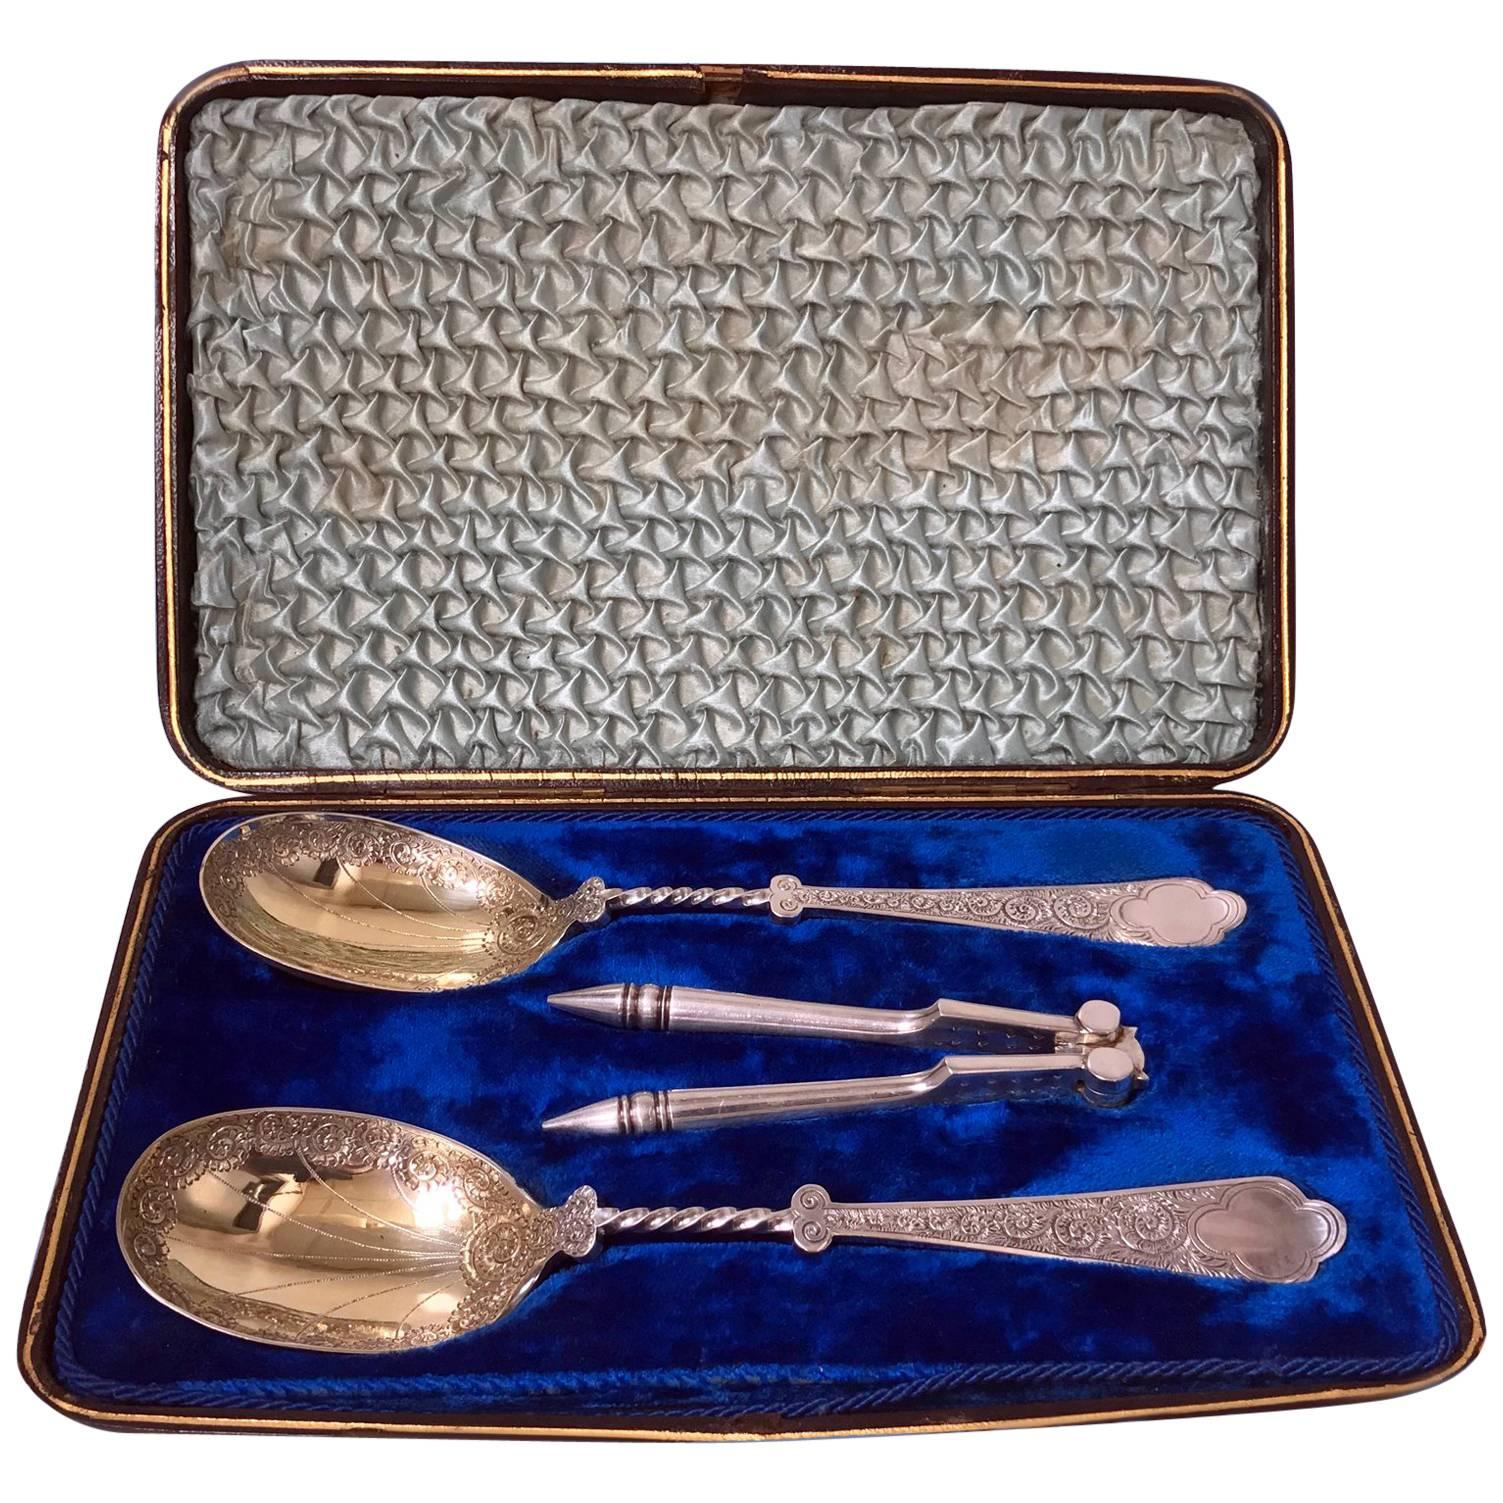 Antique Vermeil Silver Plate Fruit Serving Set, Fitted Box, English, circa 1880